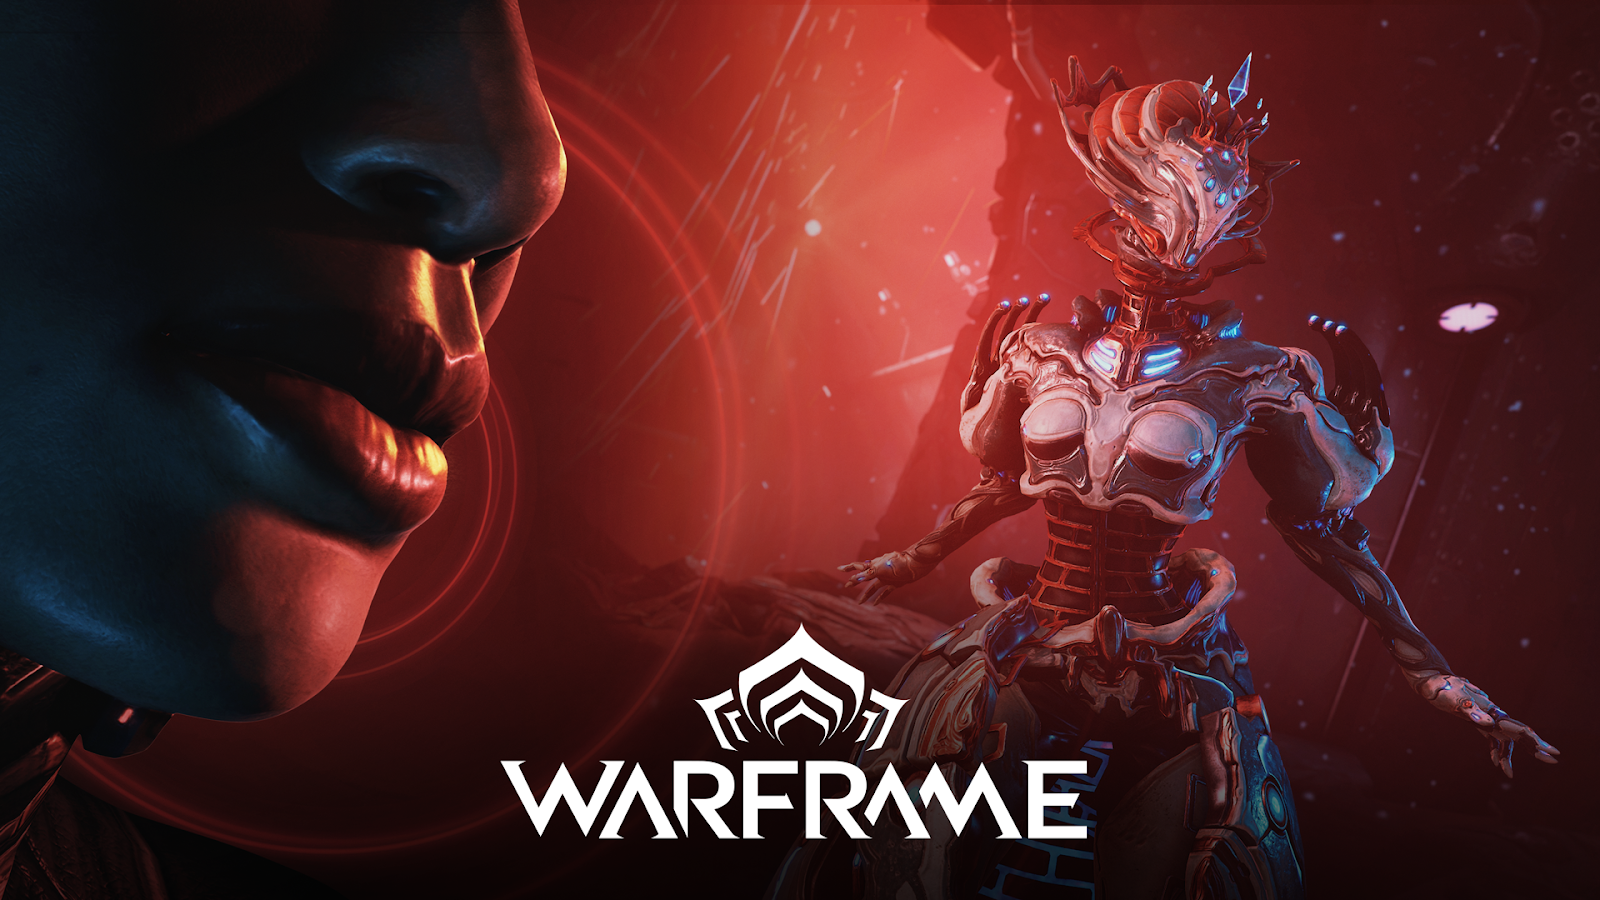 Warframe's "Abyss of Dagath" Update Haunts Players on Oct. 18 - Devstream Delivers Chills and Thrills!